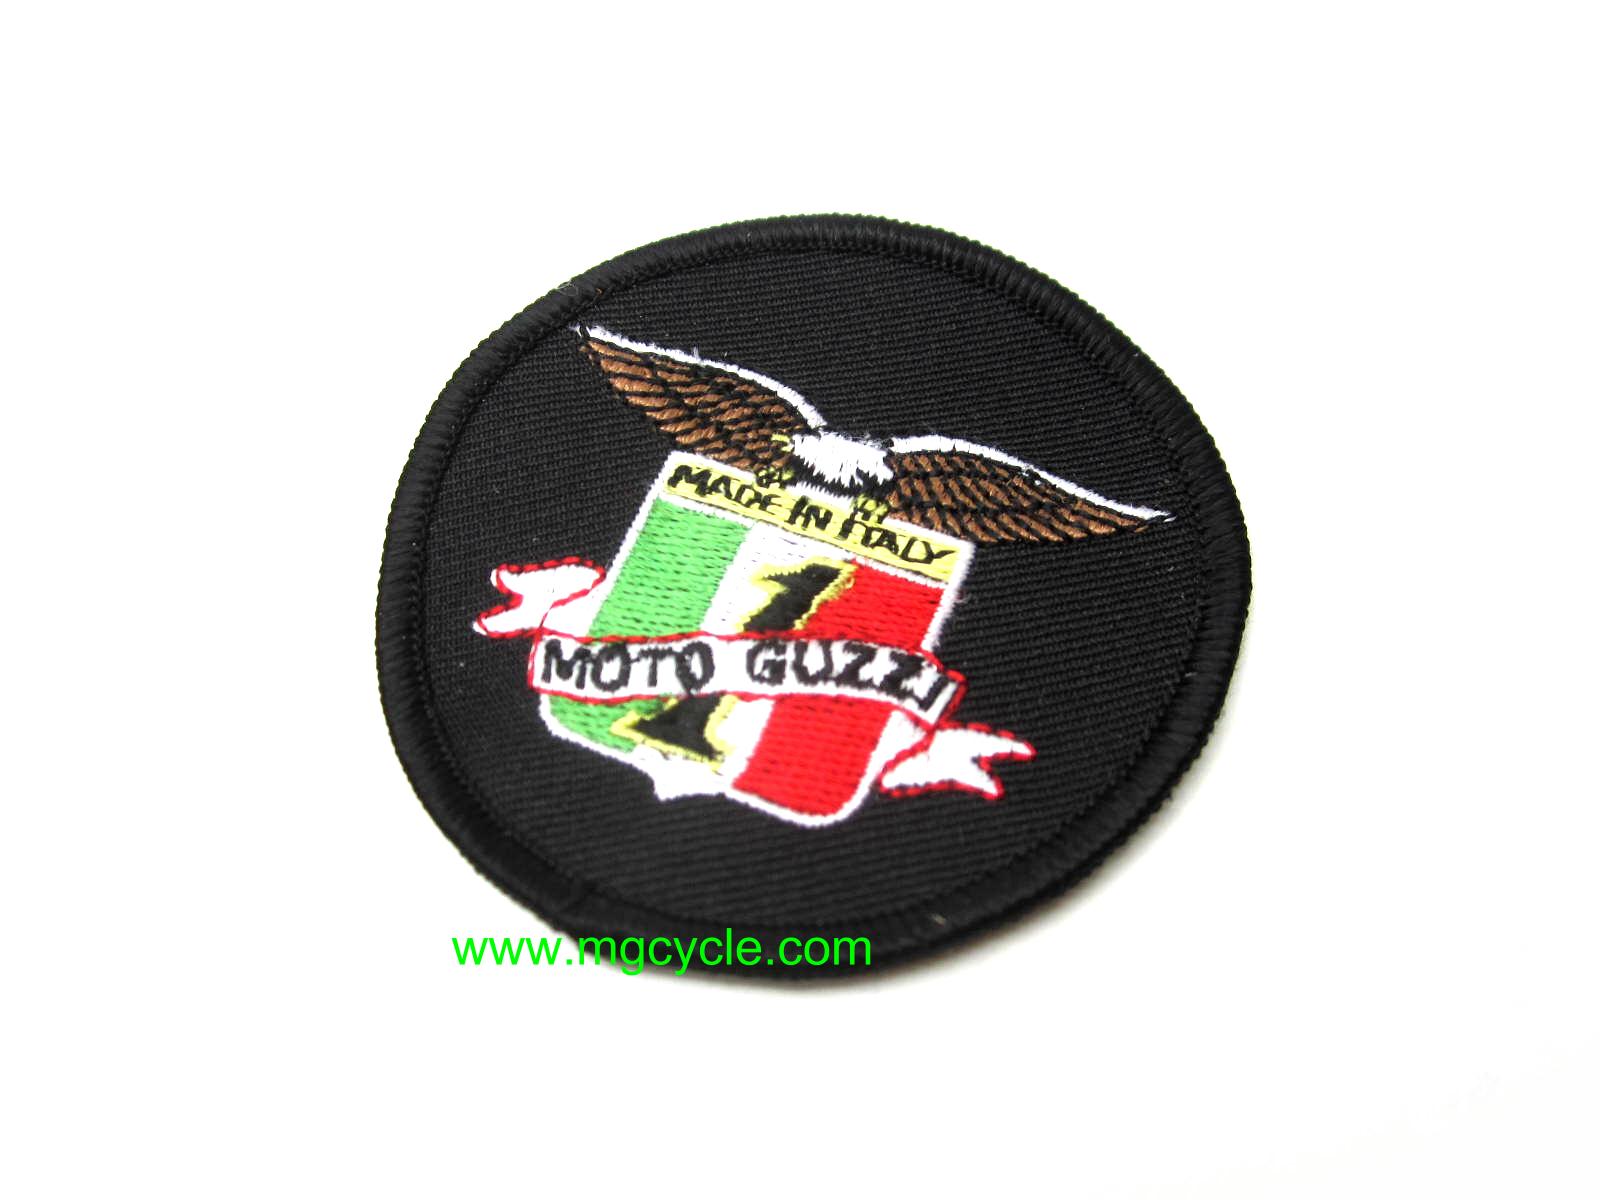 \"Made in Italy, Moto Guzzi #1\" patch